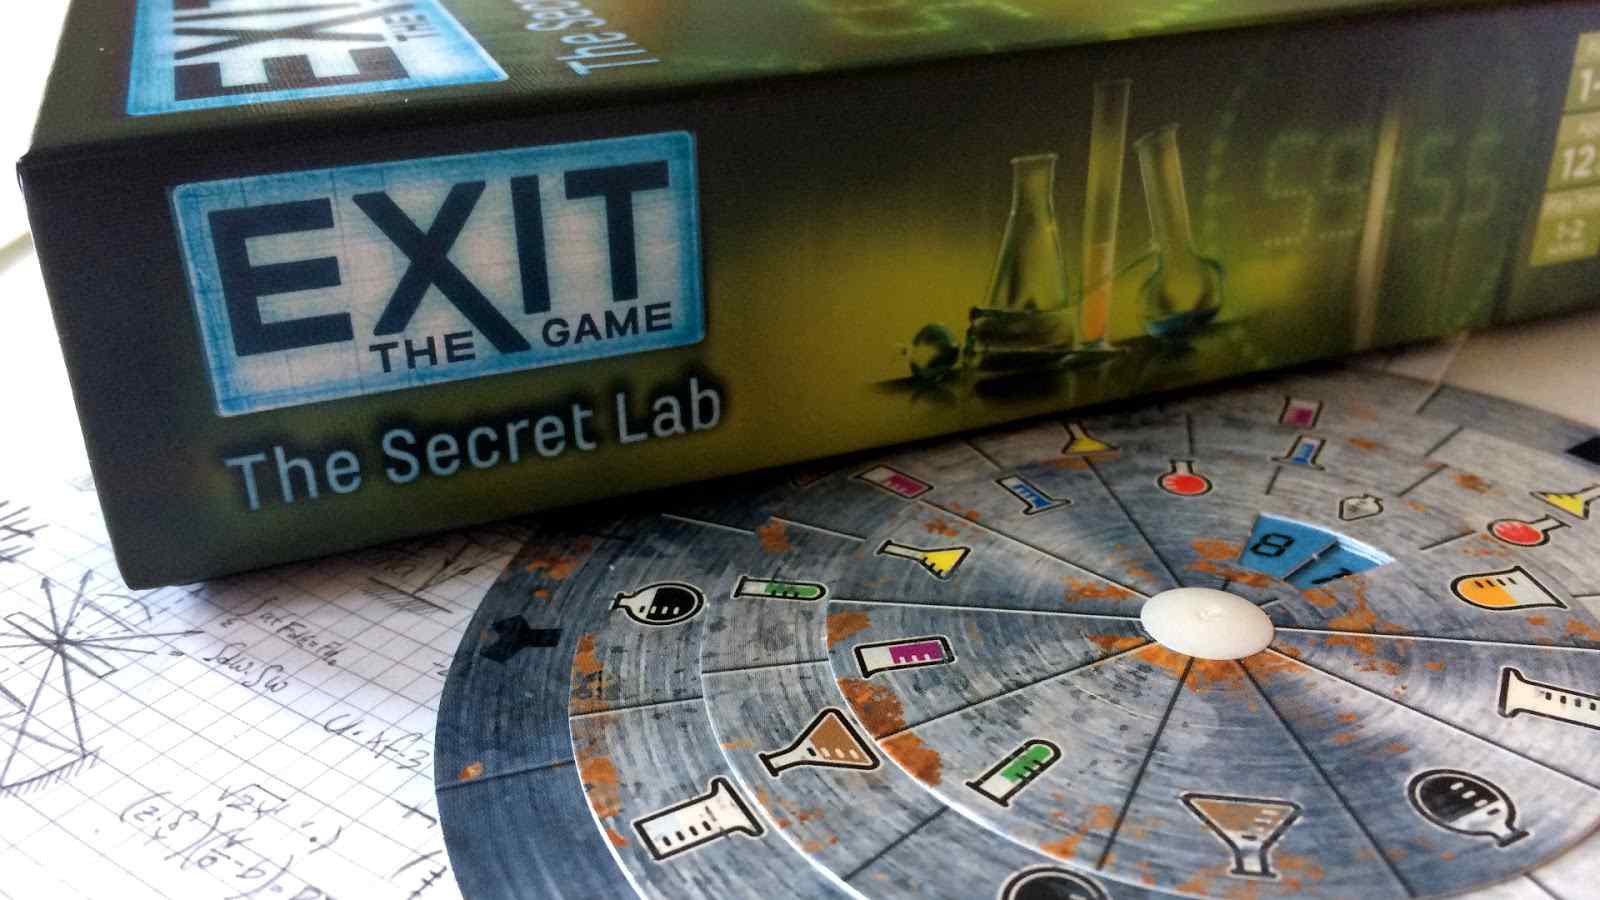 In EXIT: The Game - The Secret Lab game, you and your team have stumbled upon a secret laboratory and must escape before it's too late.